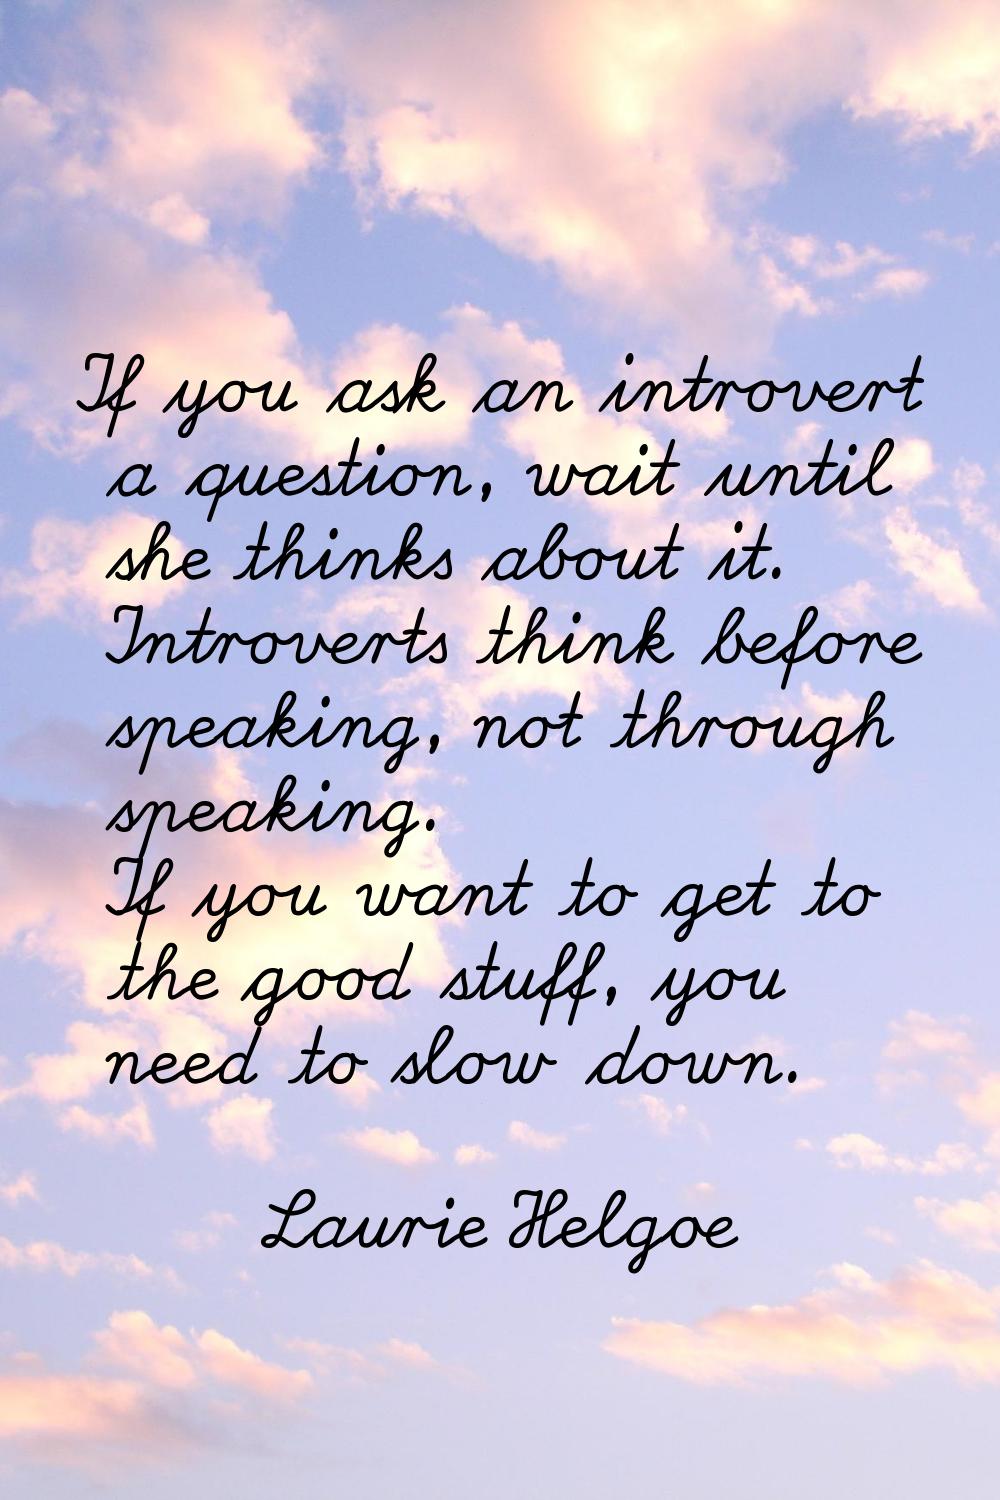 If you ask an introvert a question, wait until she thinks about it. Introverts think before speakin